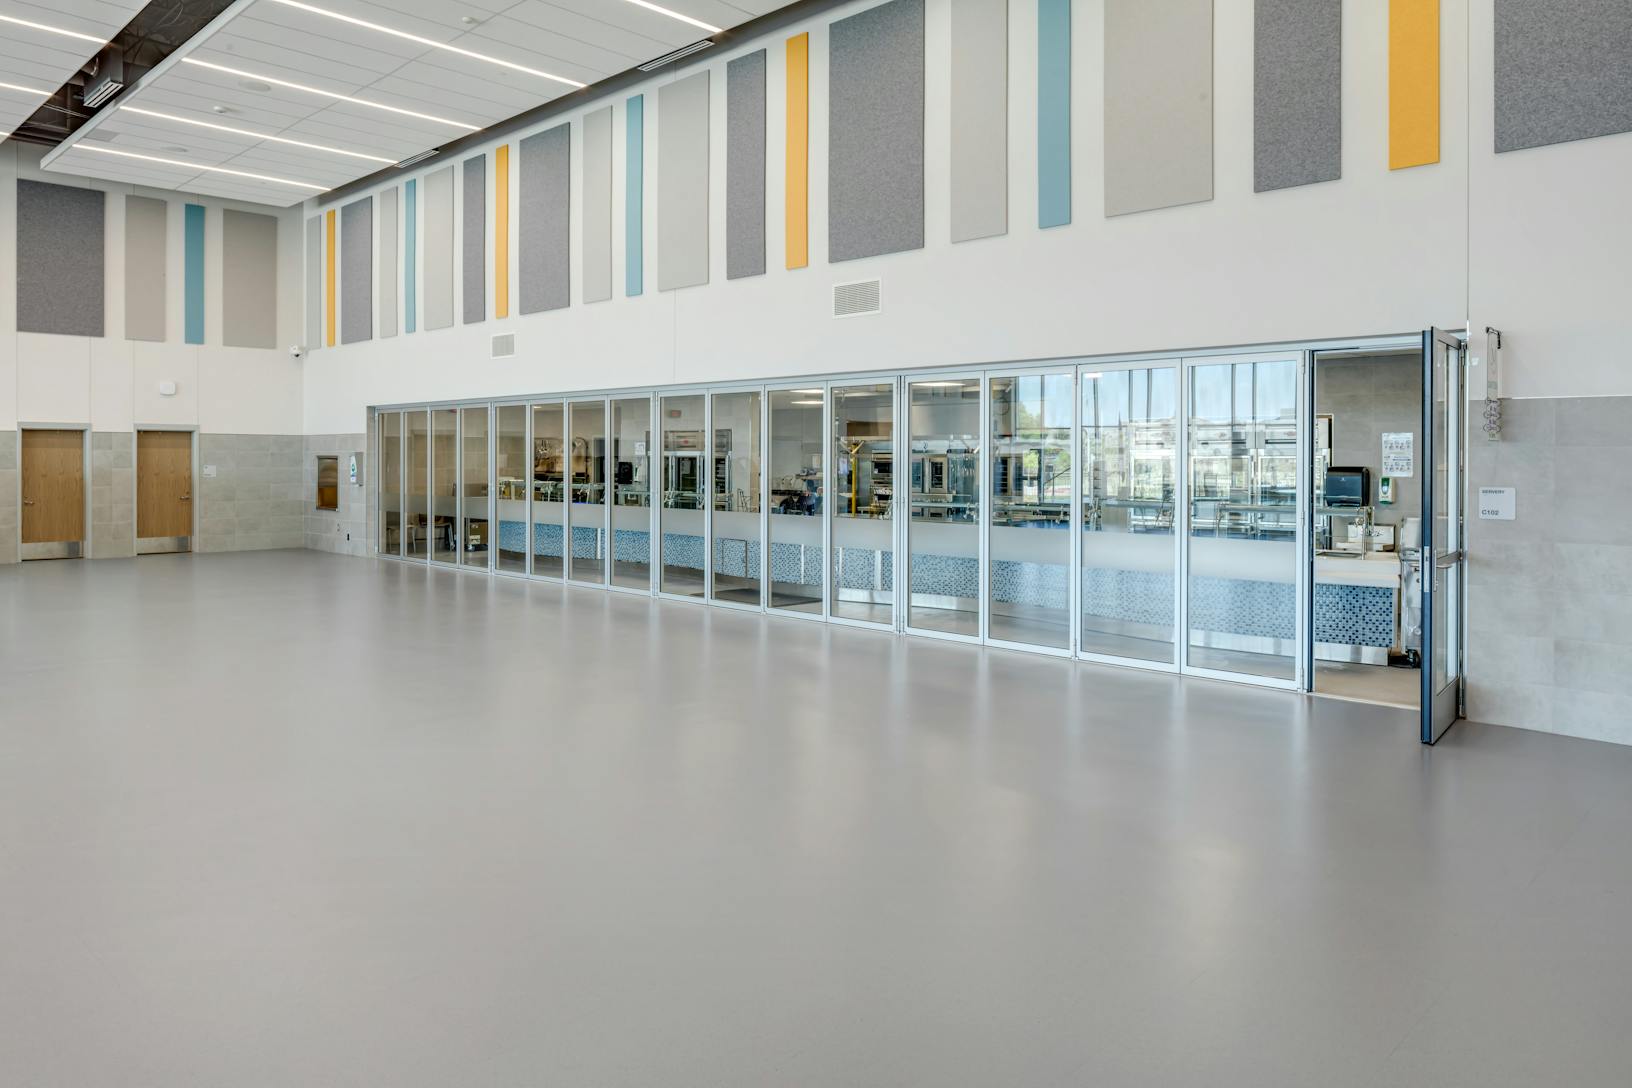 Acoustical movable glass walls at Minett Elementary school - swing door